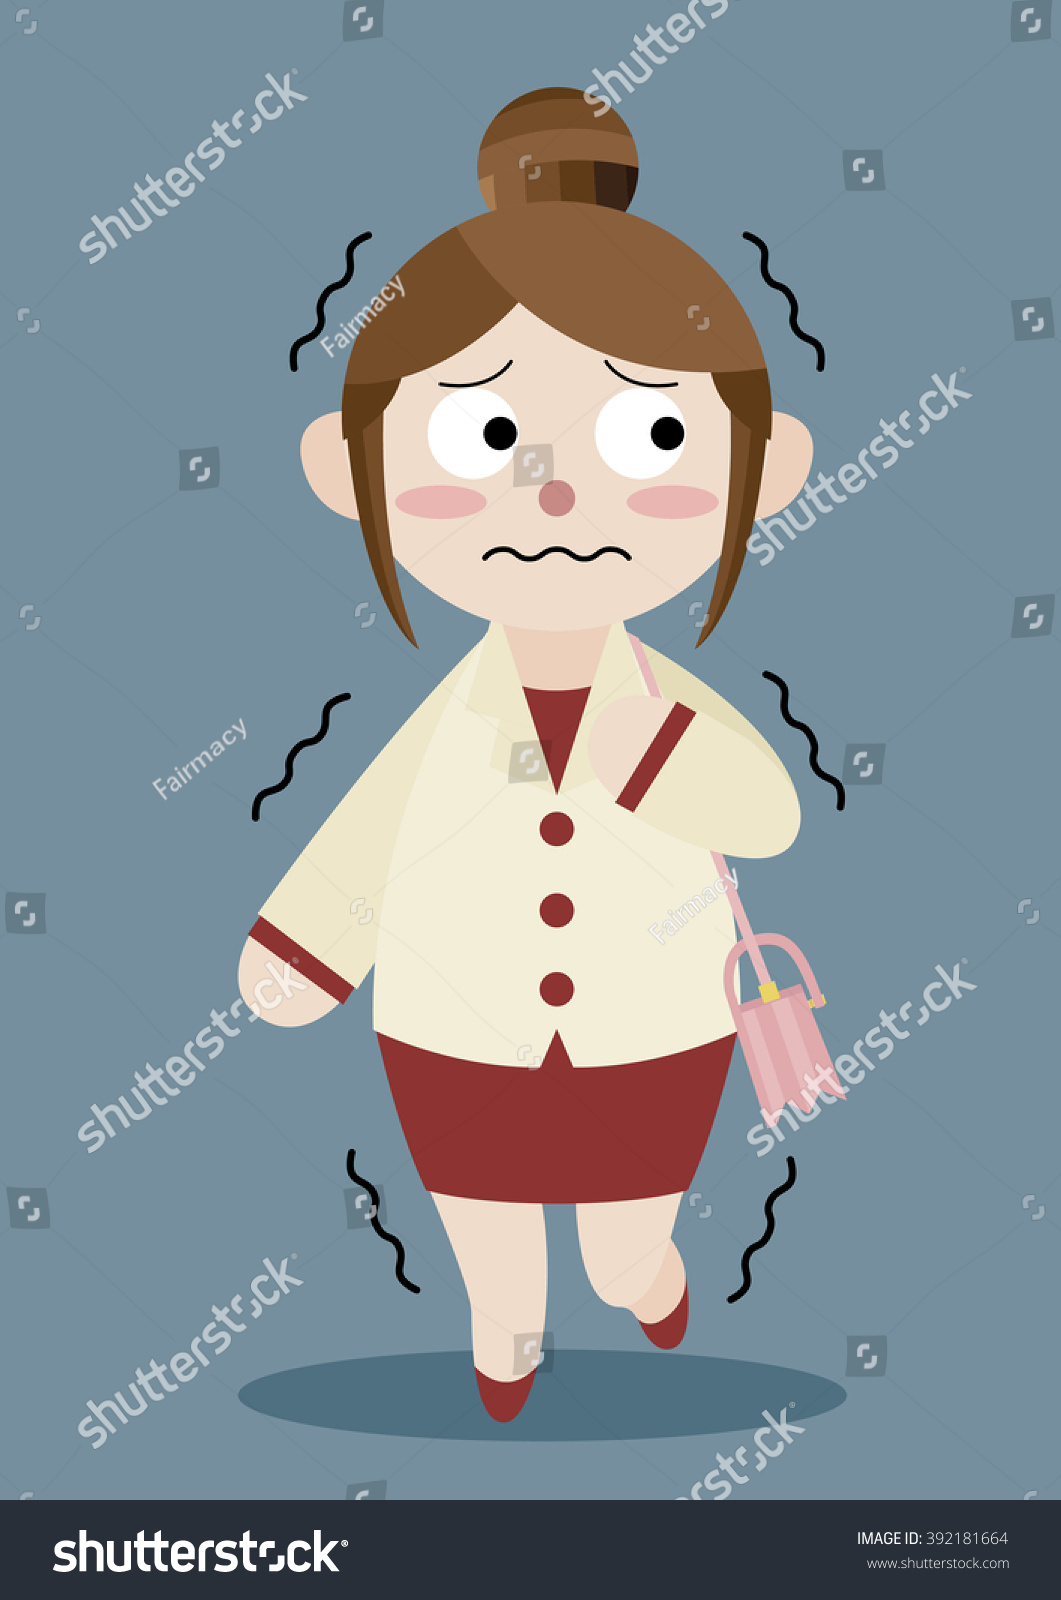 Scared Business Woman Cartoon Vector Stock Vector (Royalty Free) 392181664